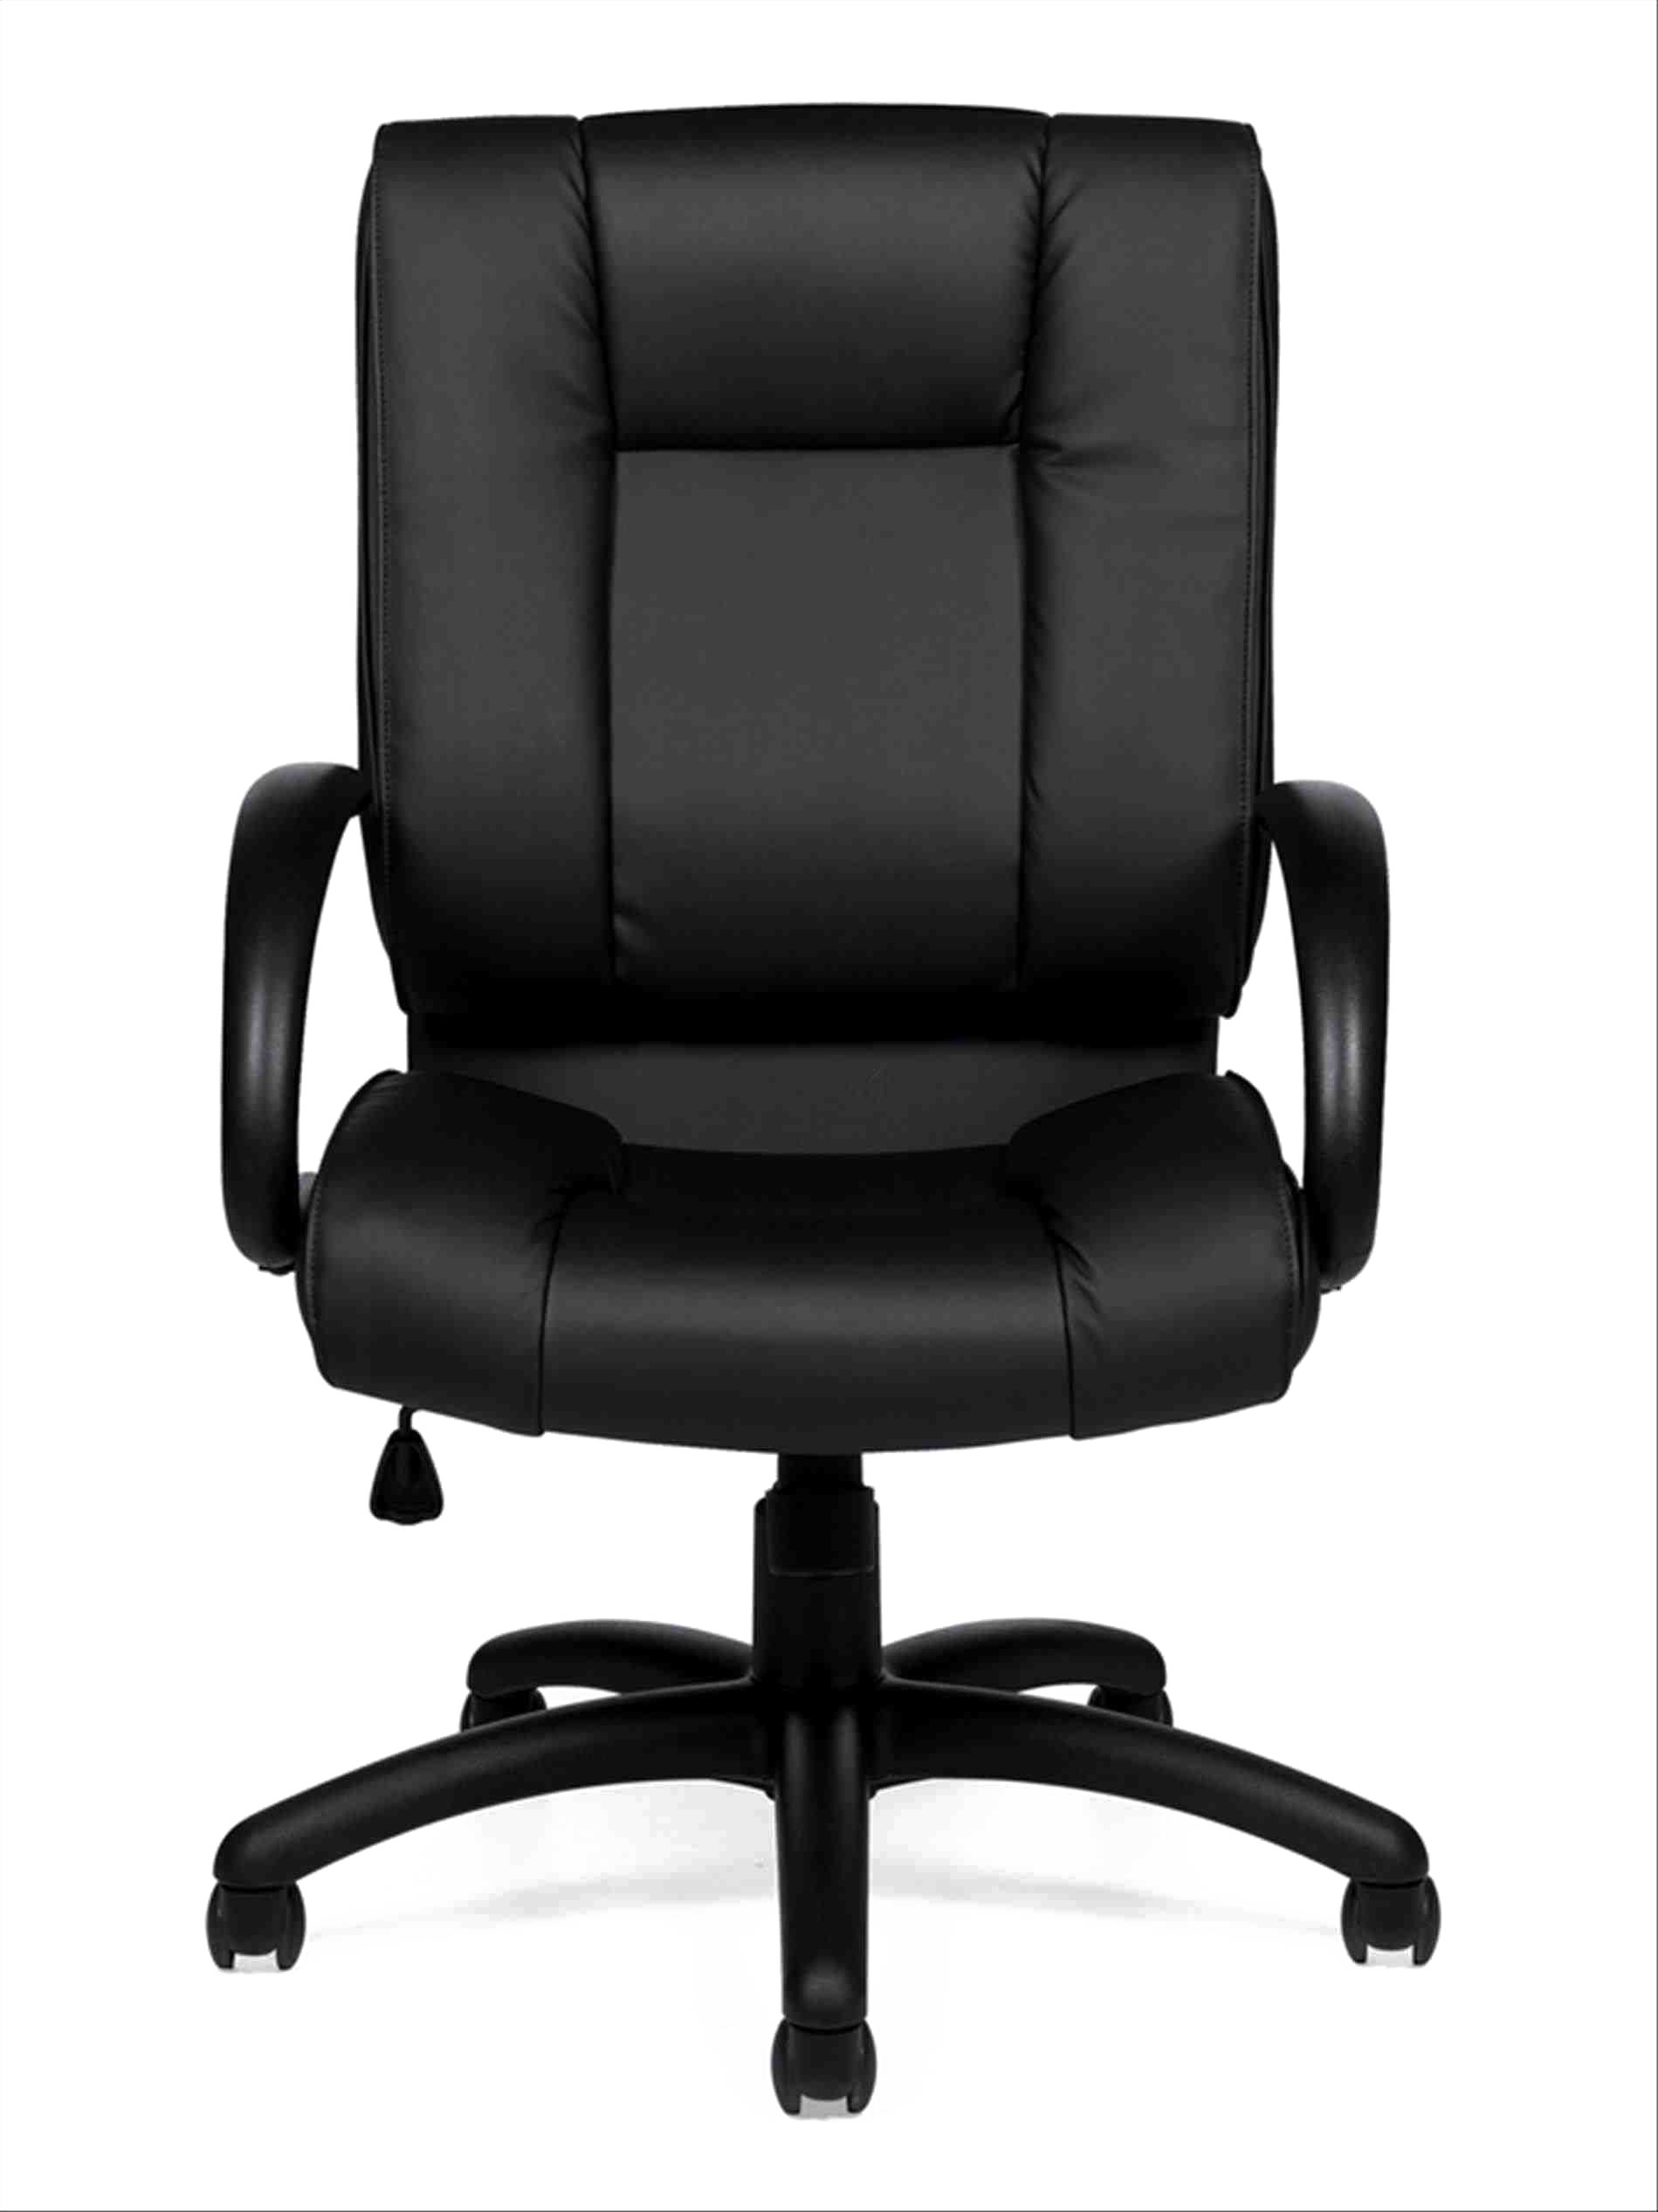 1 Result Images of Office Chair Top View Png - PNG Image Collection